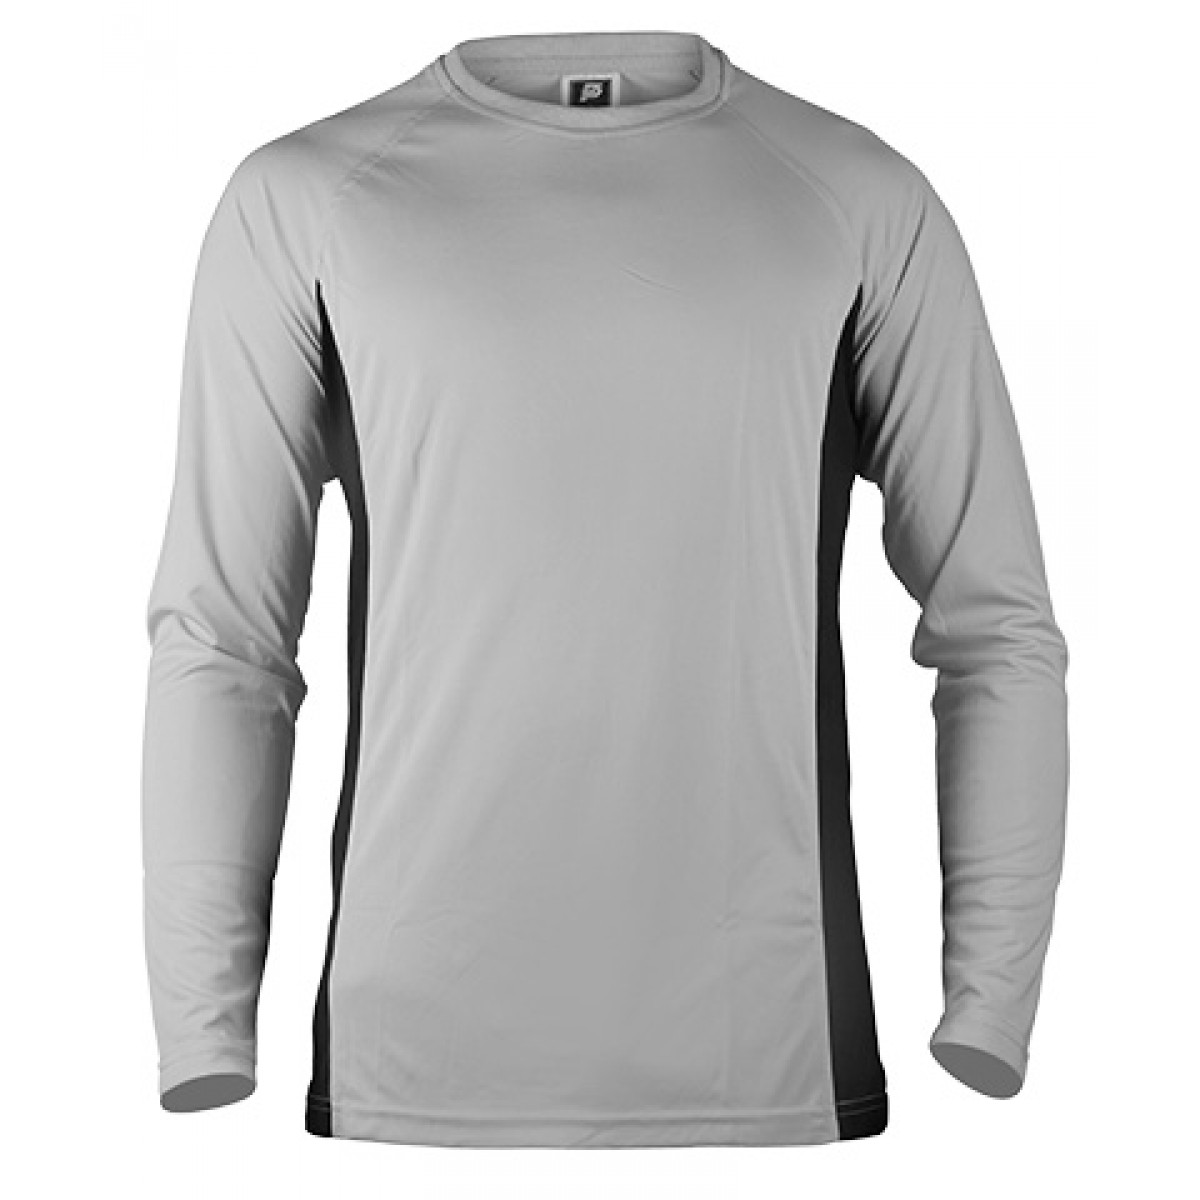 Long Sleeve Gray Performance With Black Side Insert